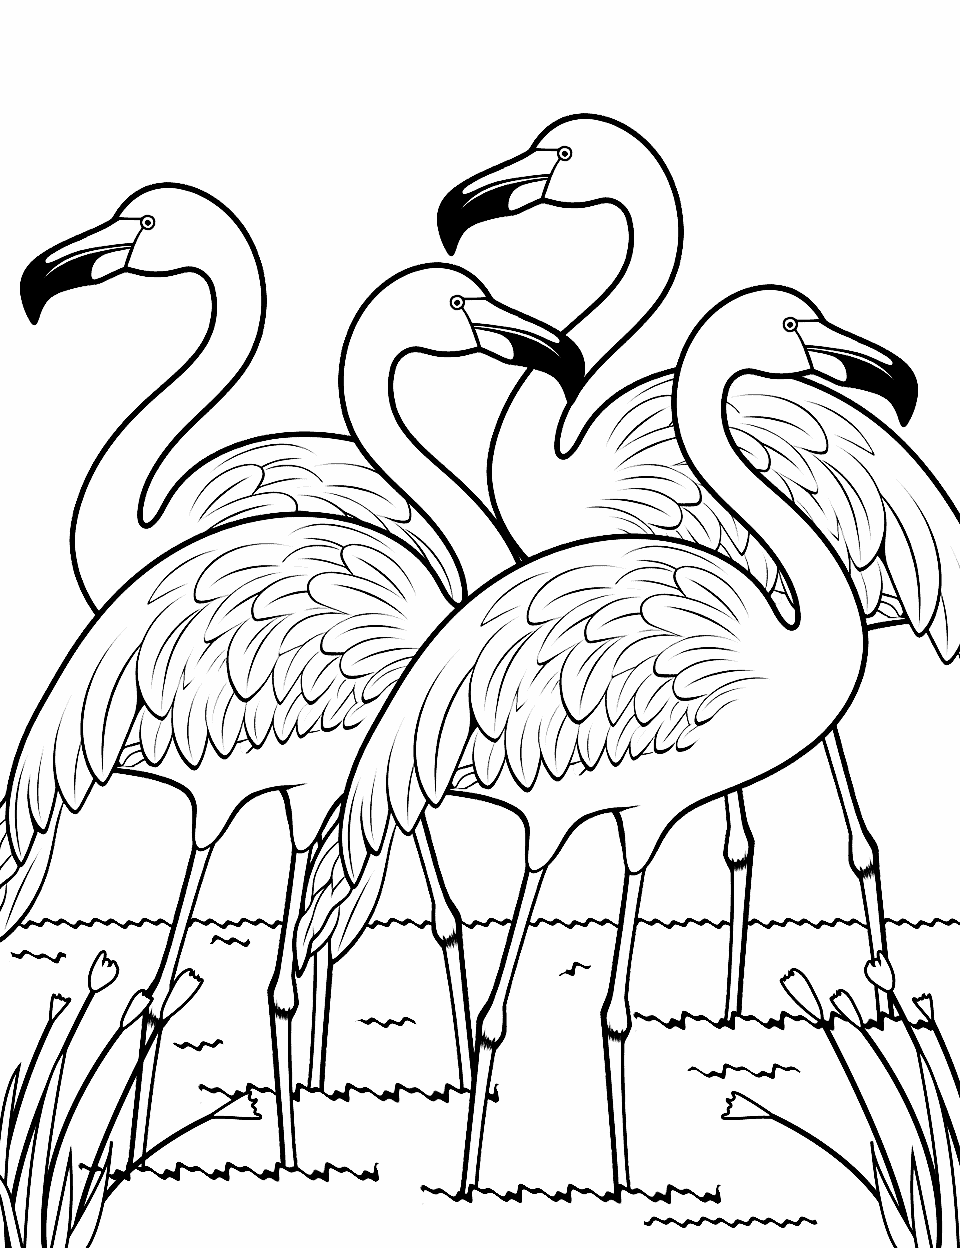 Pink Flamingo Party Coloring Page - Several pink flamingos together creating a fun and vibrant scene for coloring.